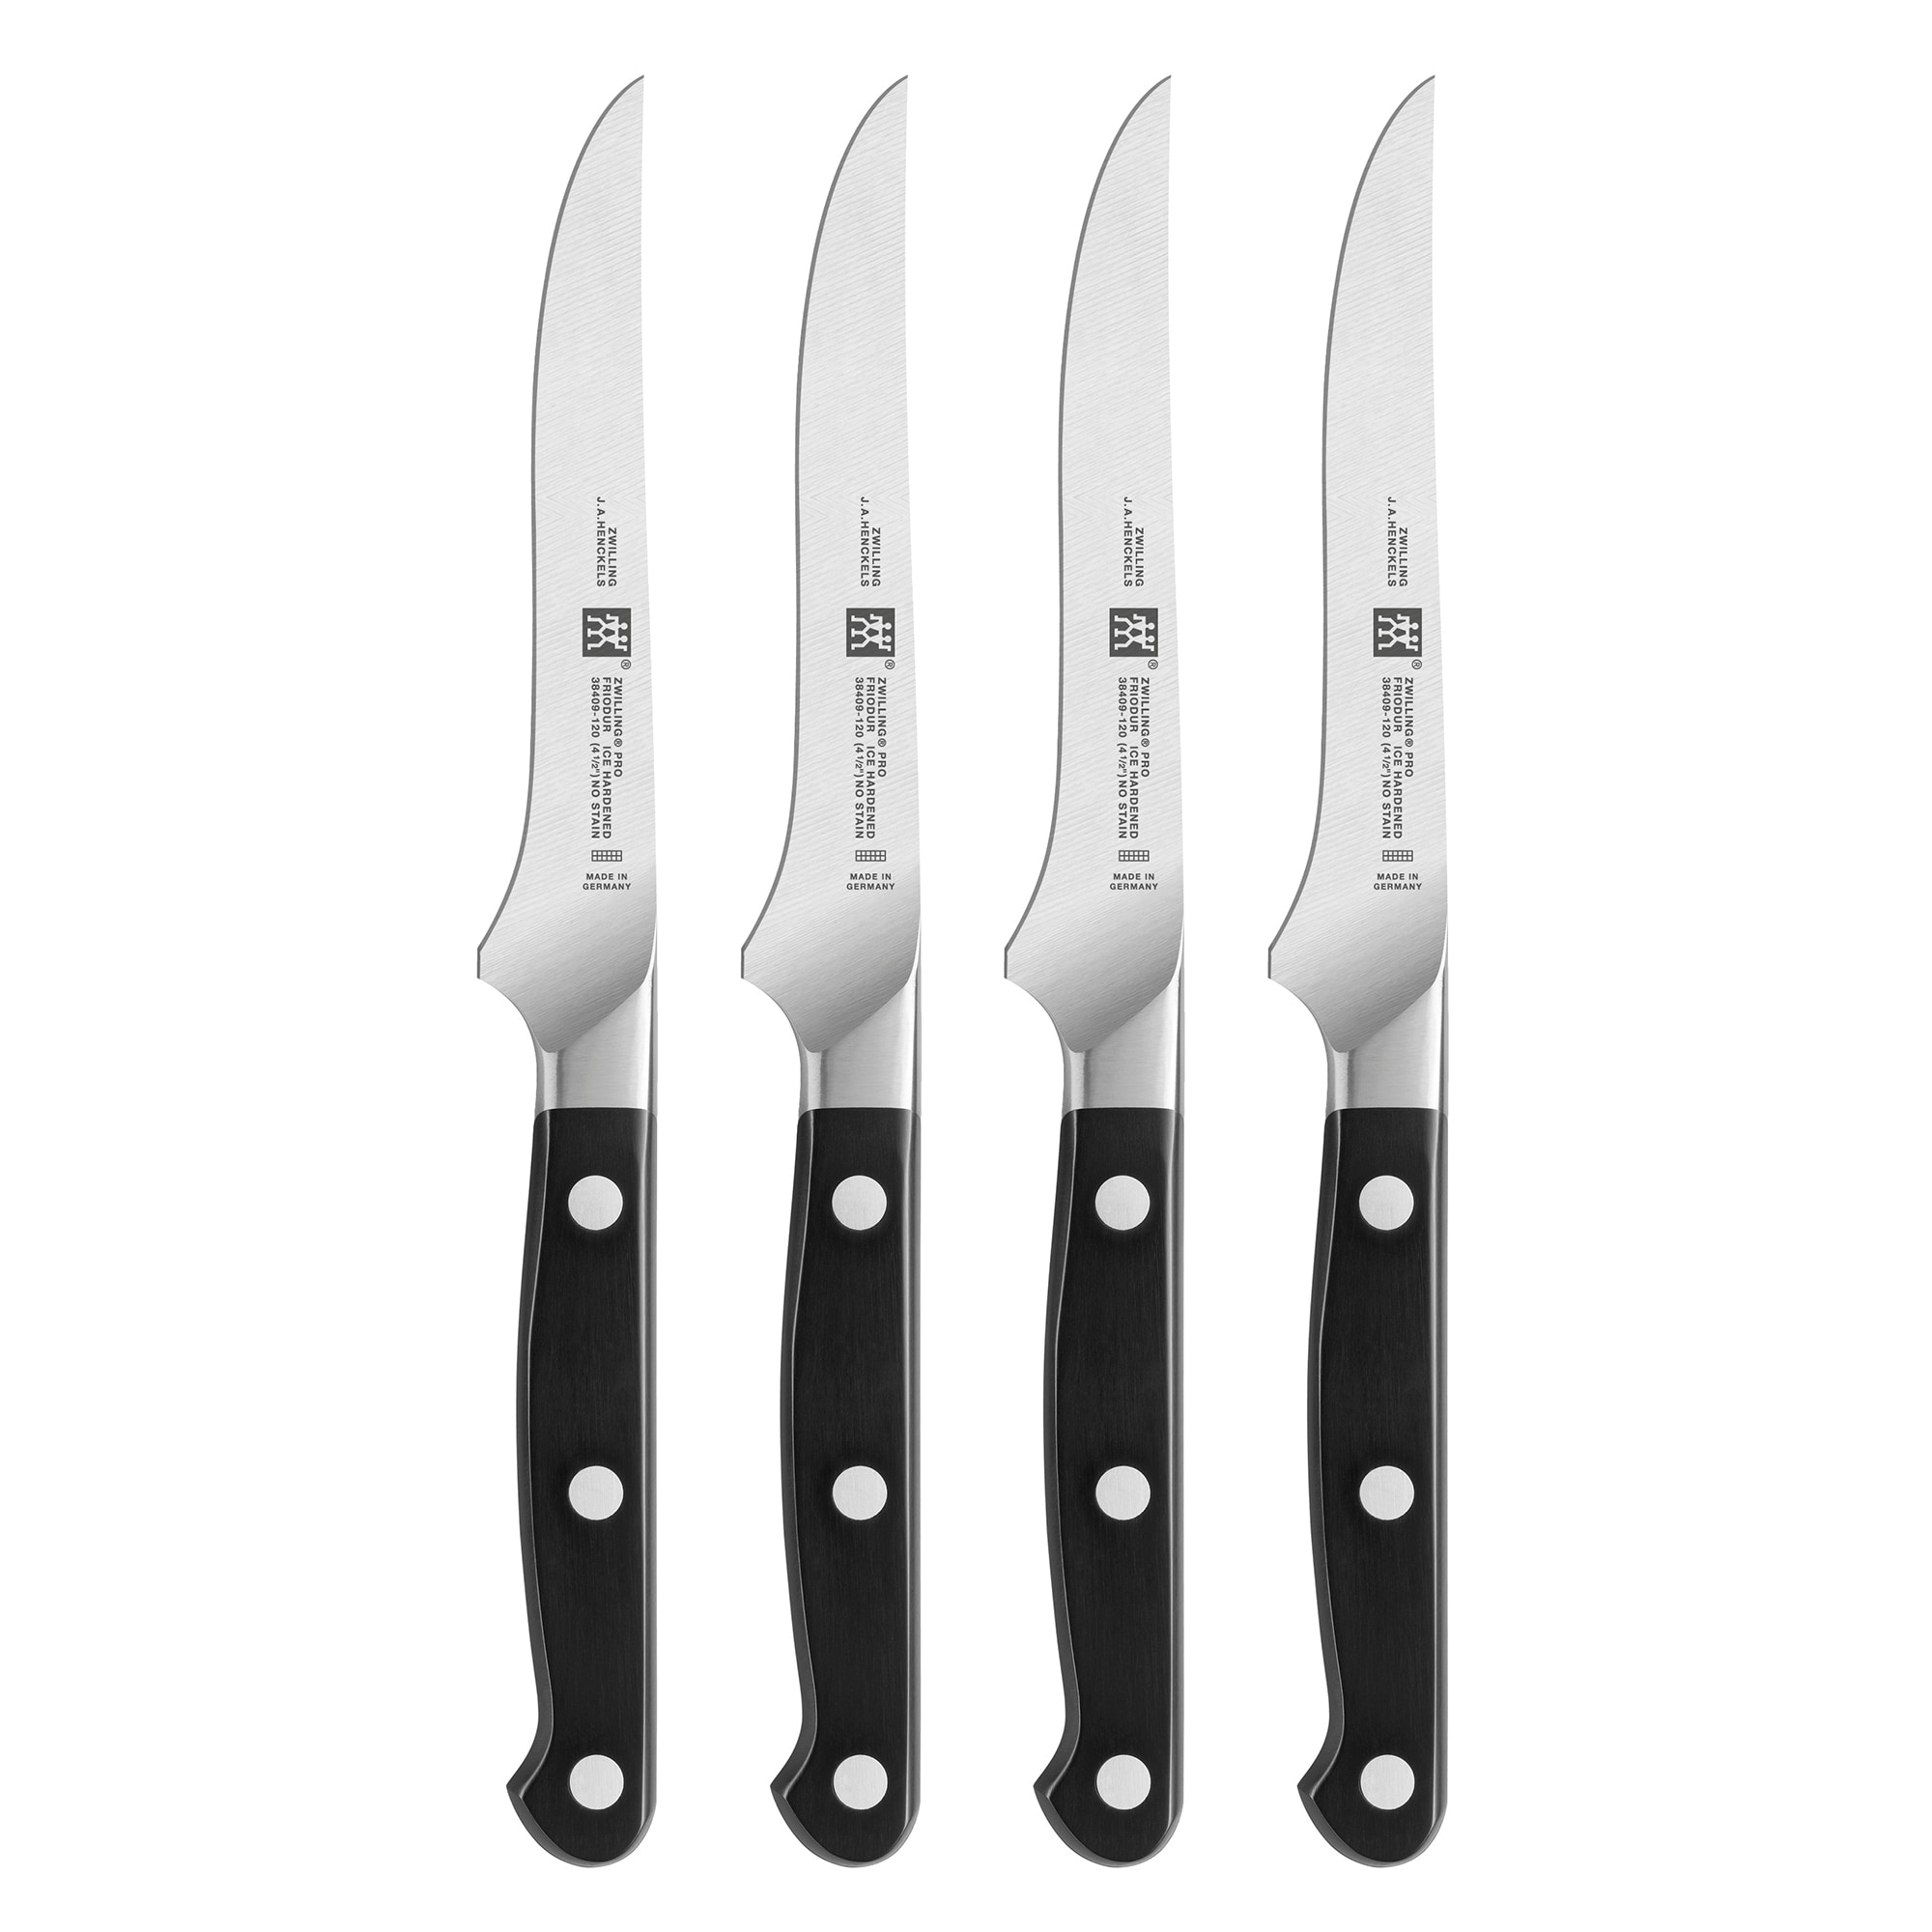 https://ak1.ostkcdn.com/images/products/is/images/direct/af4461a4333661217755d513be36982a10690a4b/ZWILLING-Pro-4-pc-Steak-Knife-Set.jpg